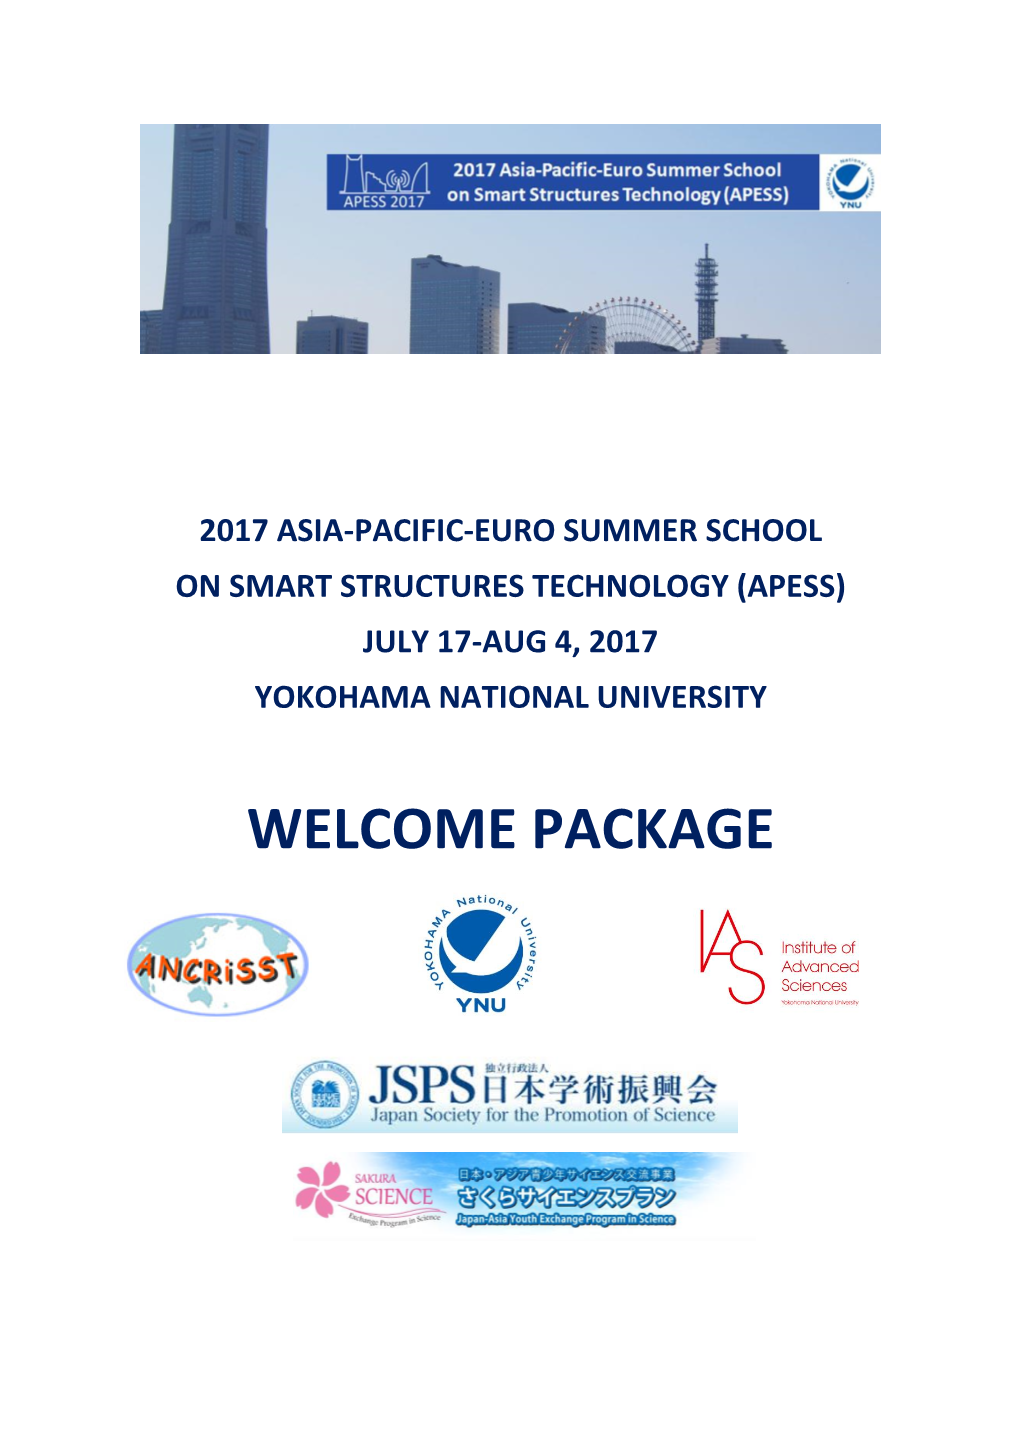 APESS 2017 Welcome Package